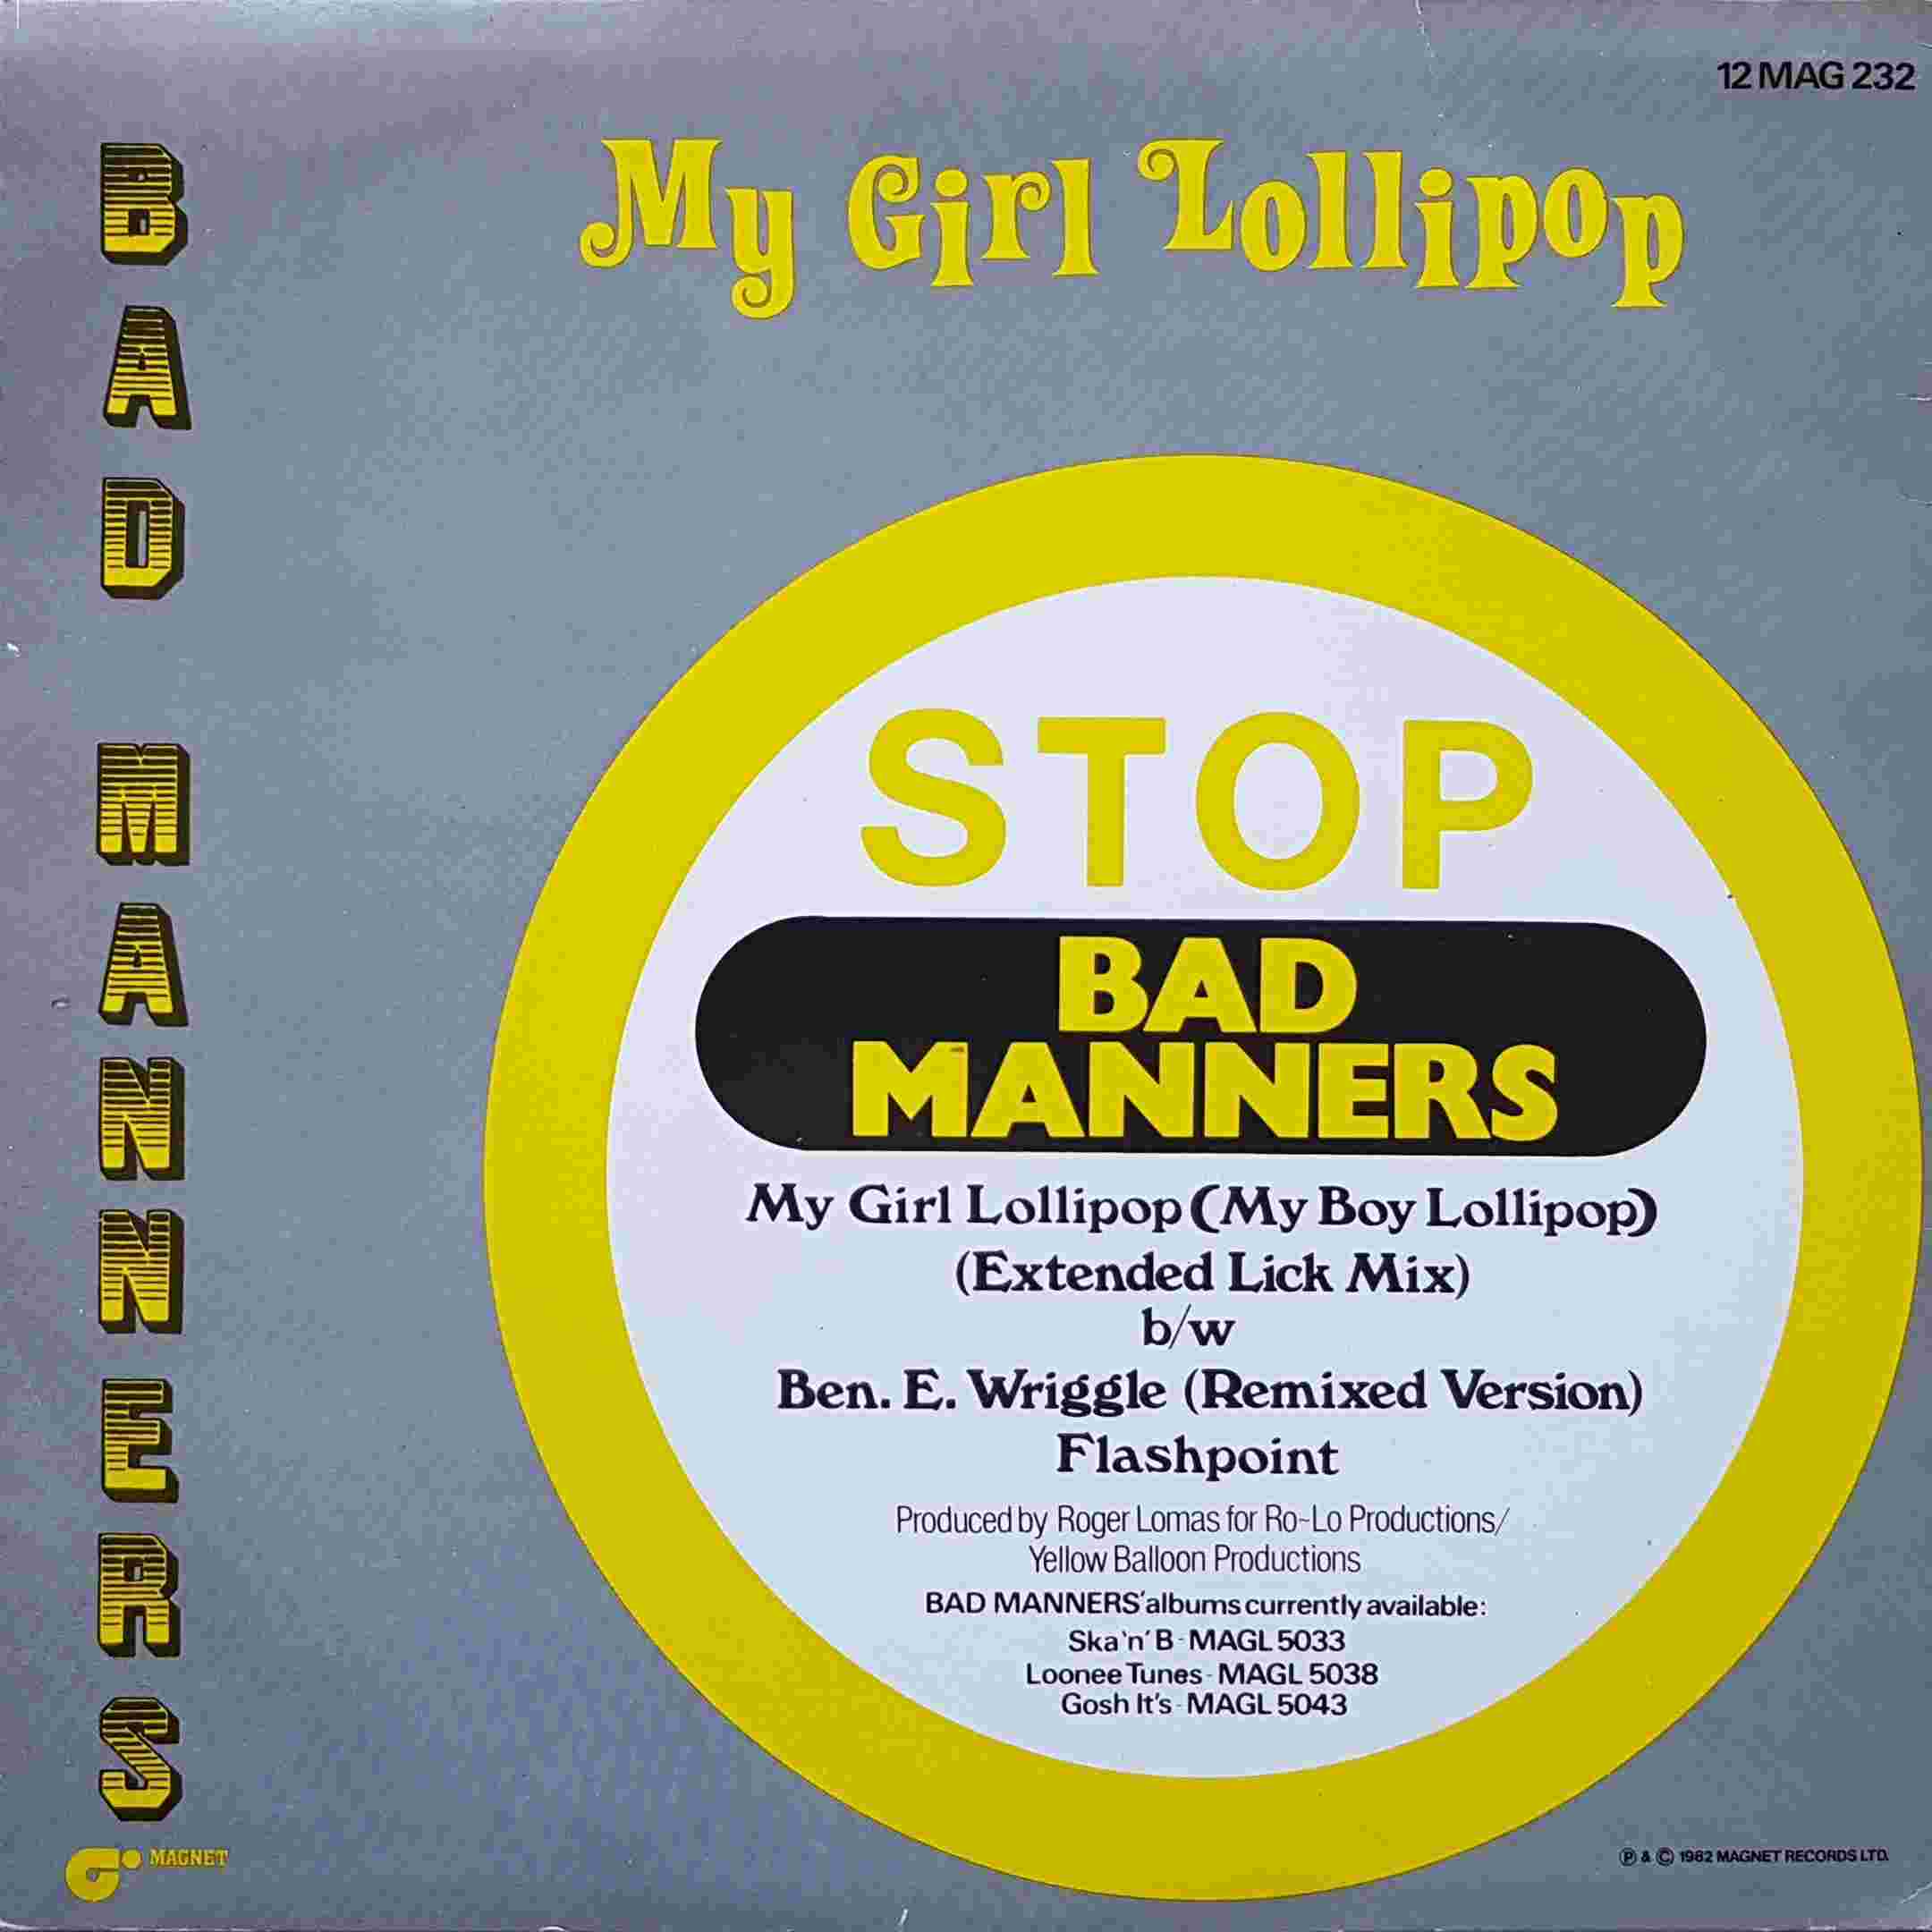 Picture of 12 MAG 232 My girl lollipop by artist Bad Manners  